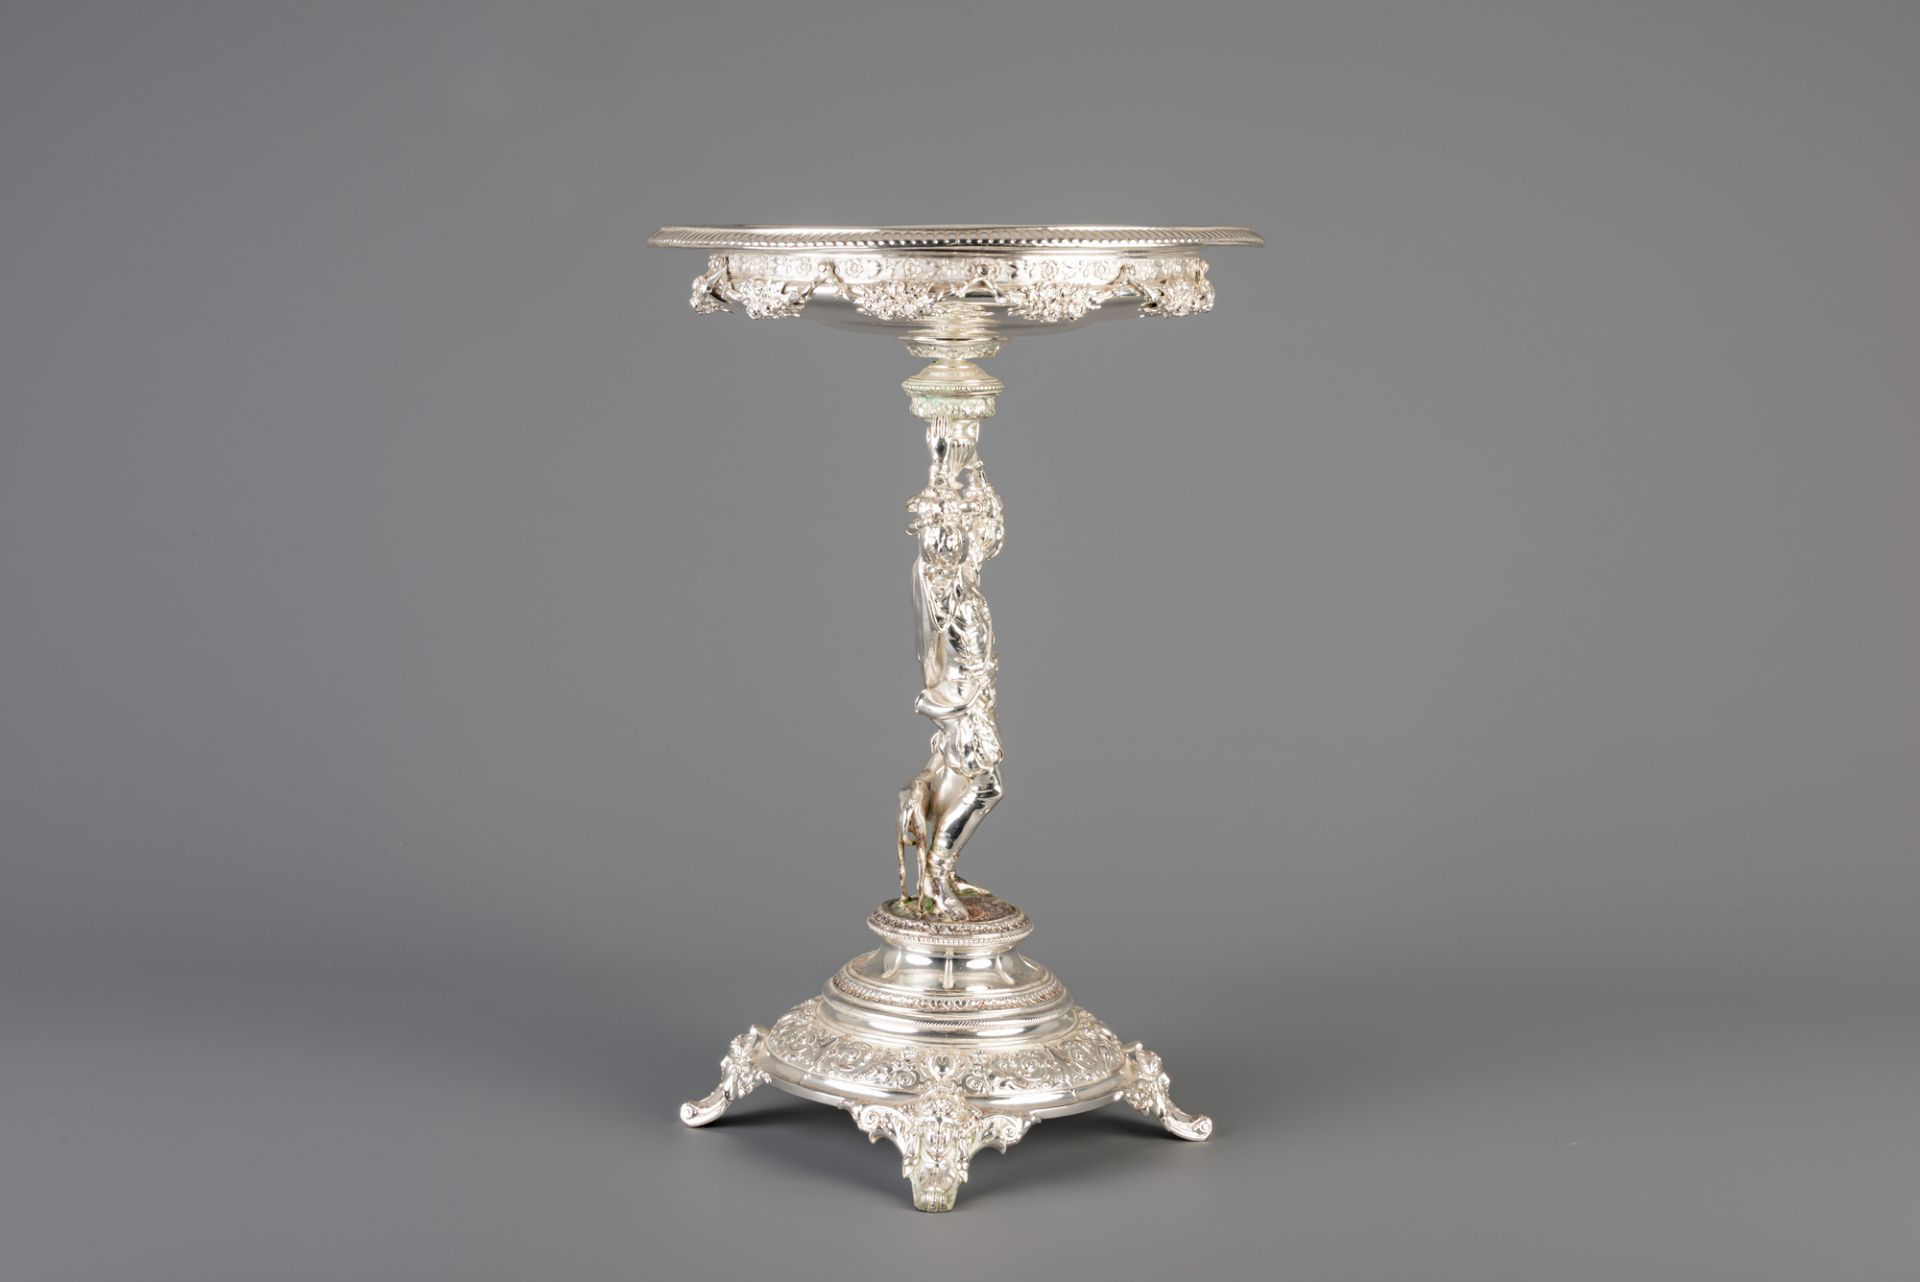 A German silver figural centrepiece with a nobleman and a greyhound during the hunt, 800/000, 19th C - Image 4 of 7